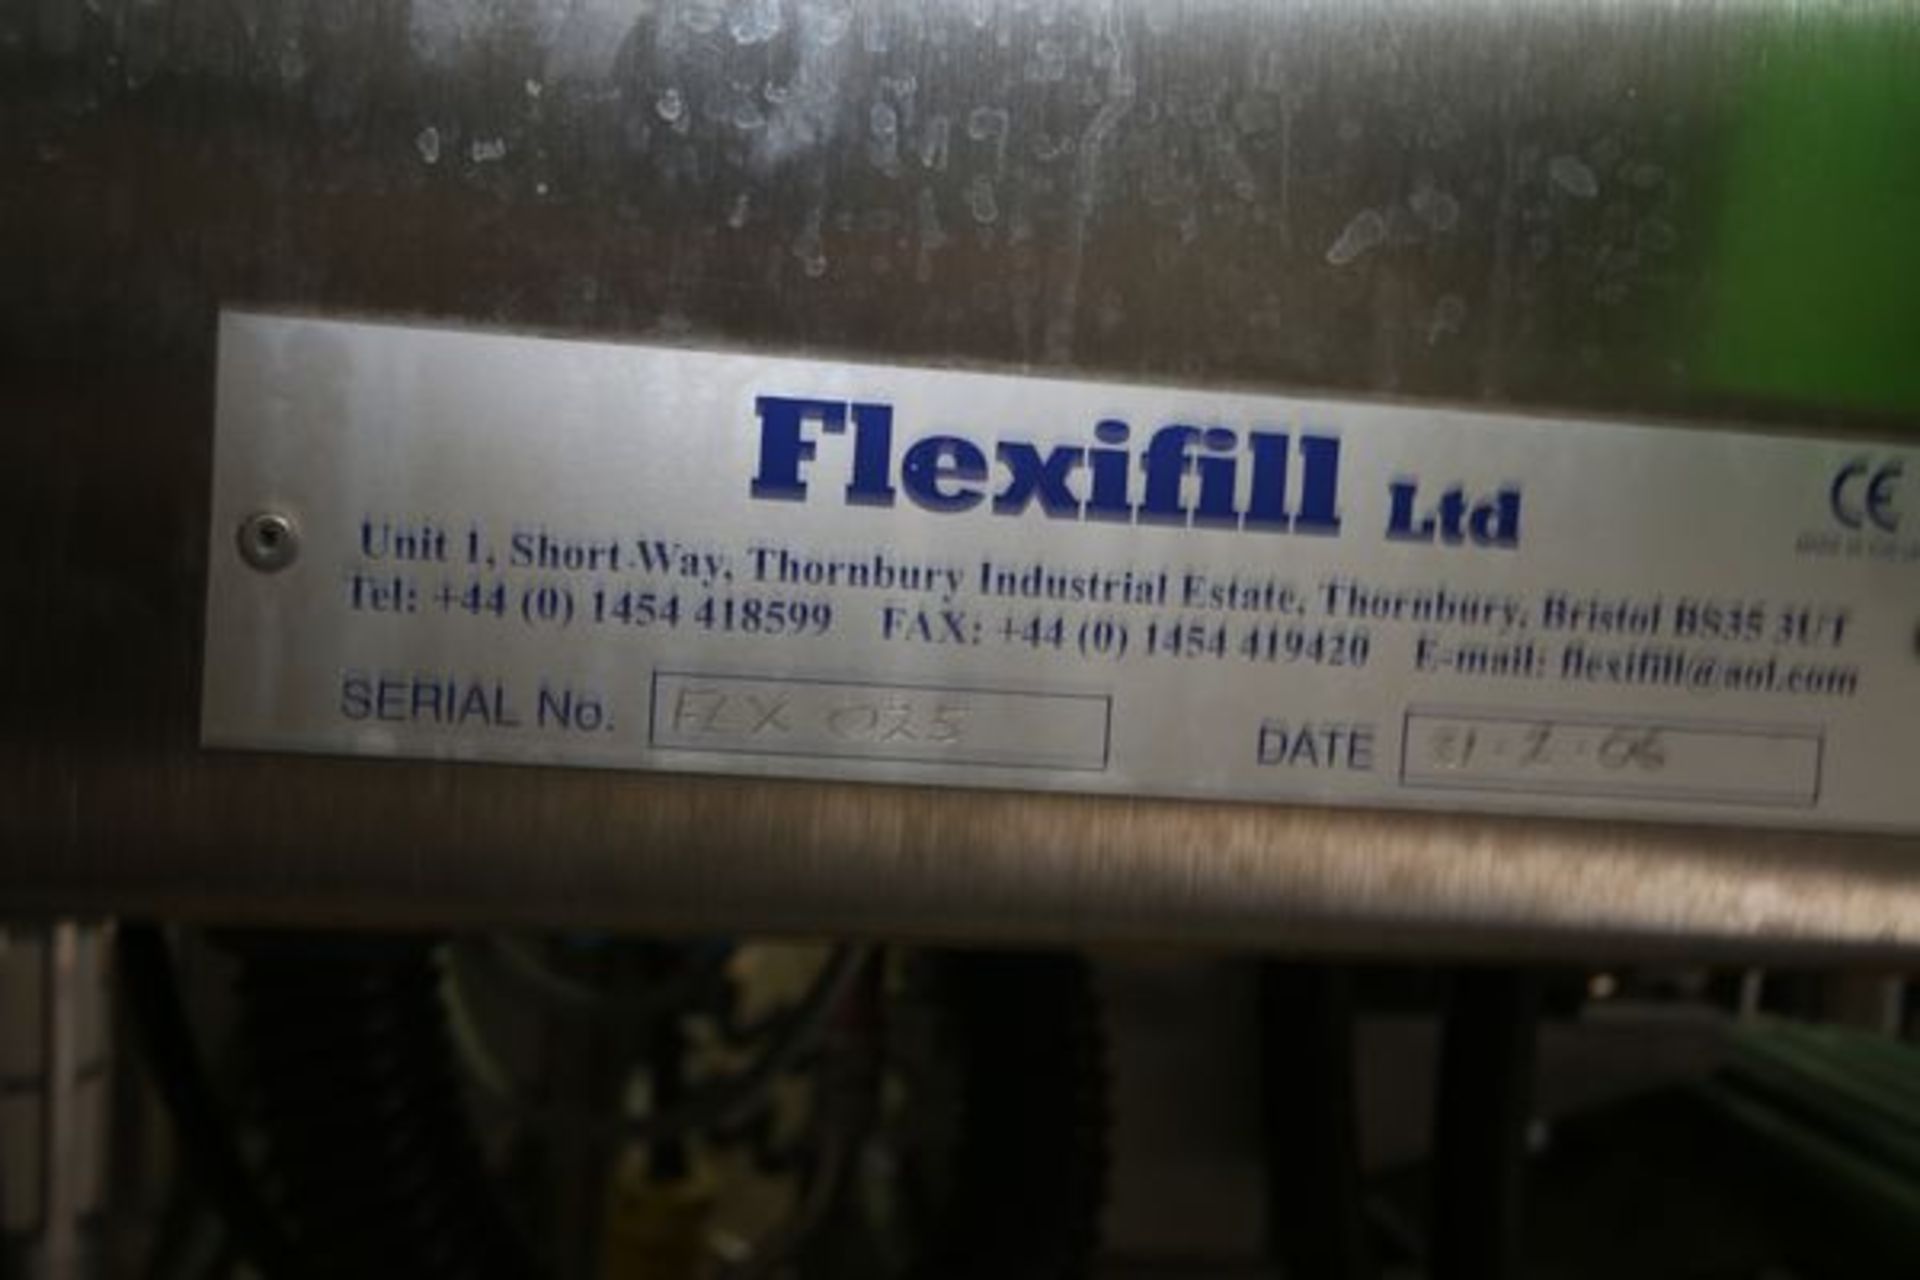 2006 SAI / Flexifill Bag-N-Box Filler & Capper, S/N FLX-025, Previously Utilized to Fill and Cap - Image 3 of 4